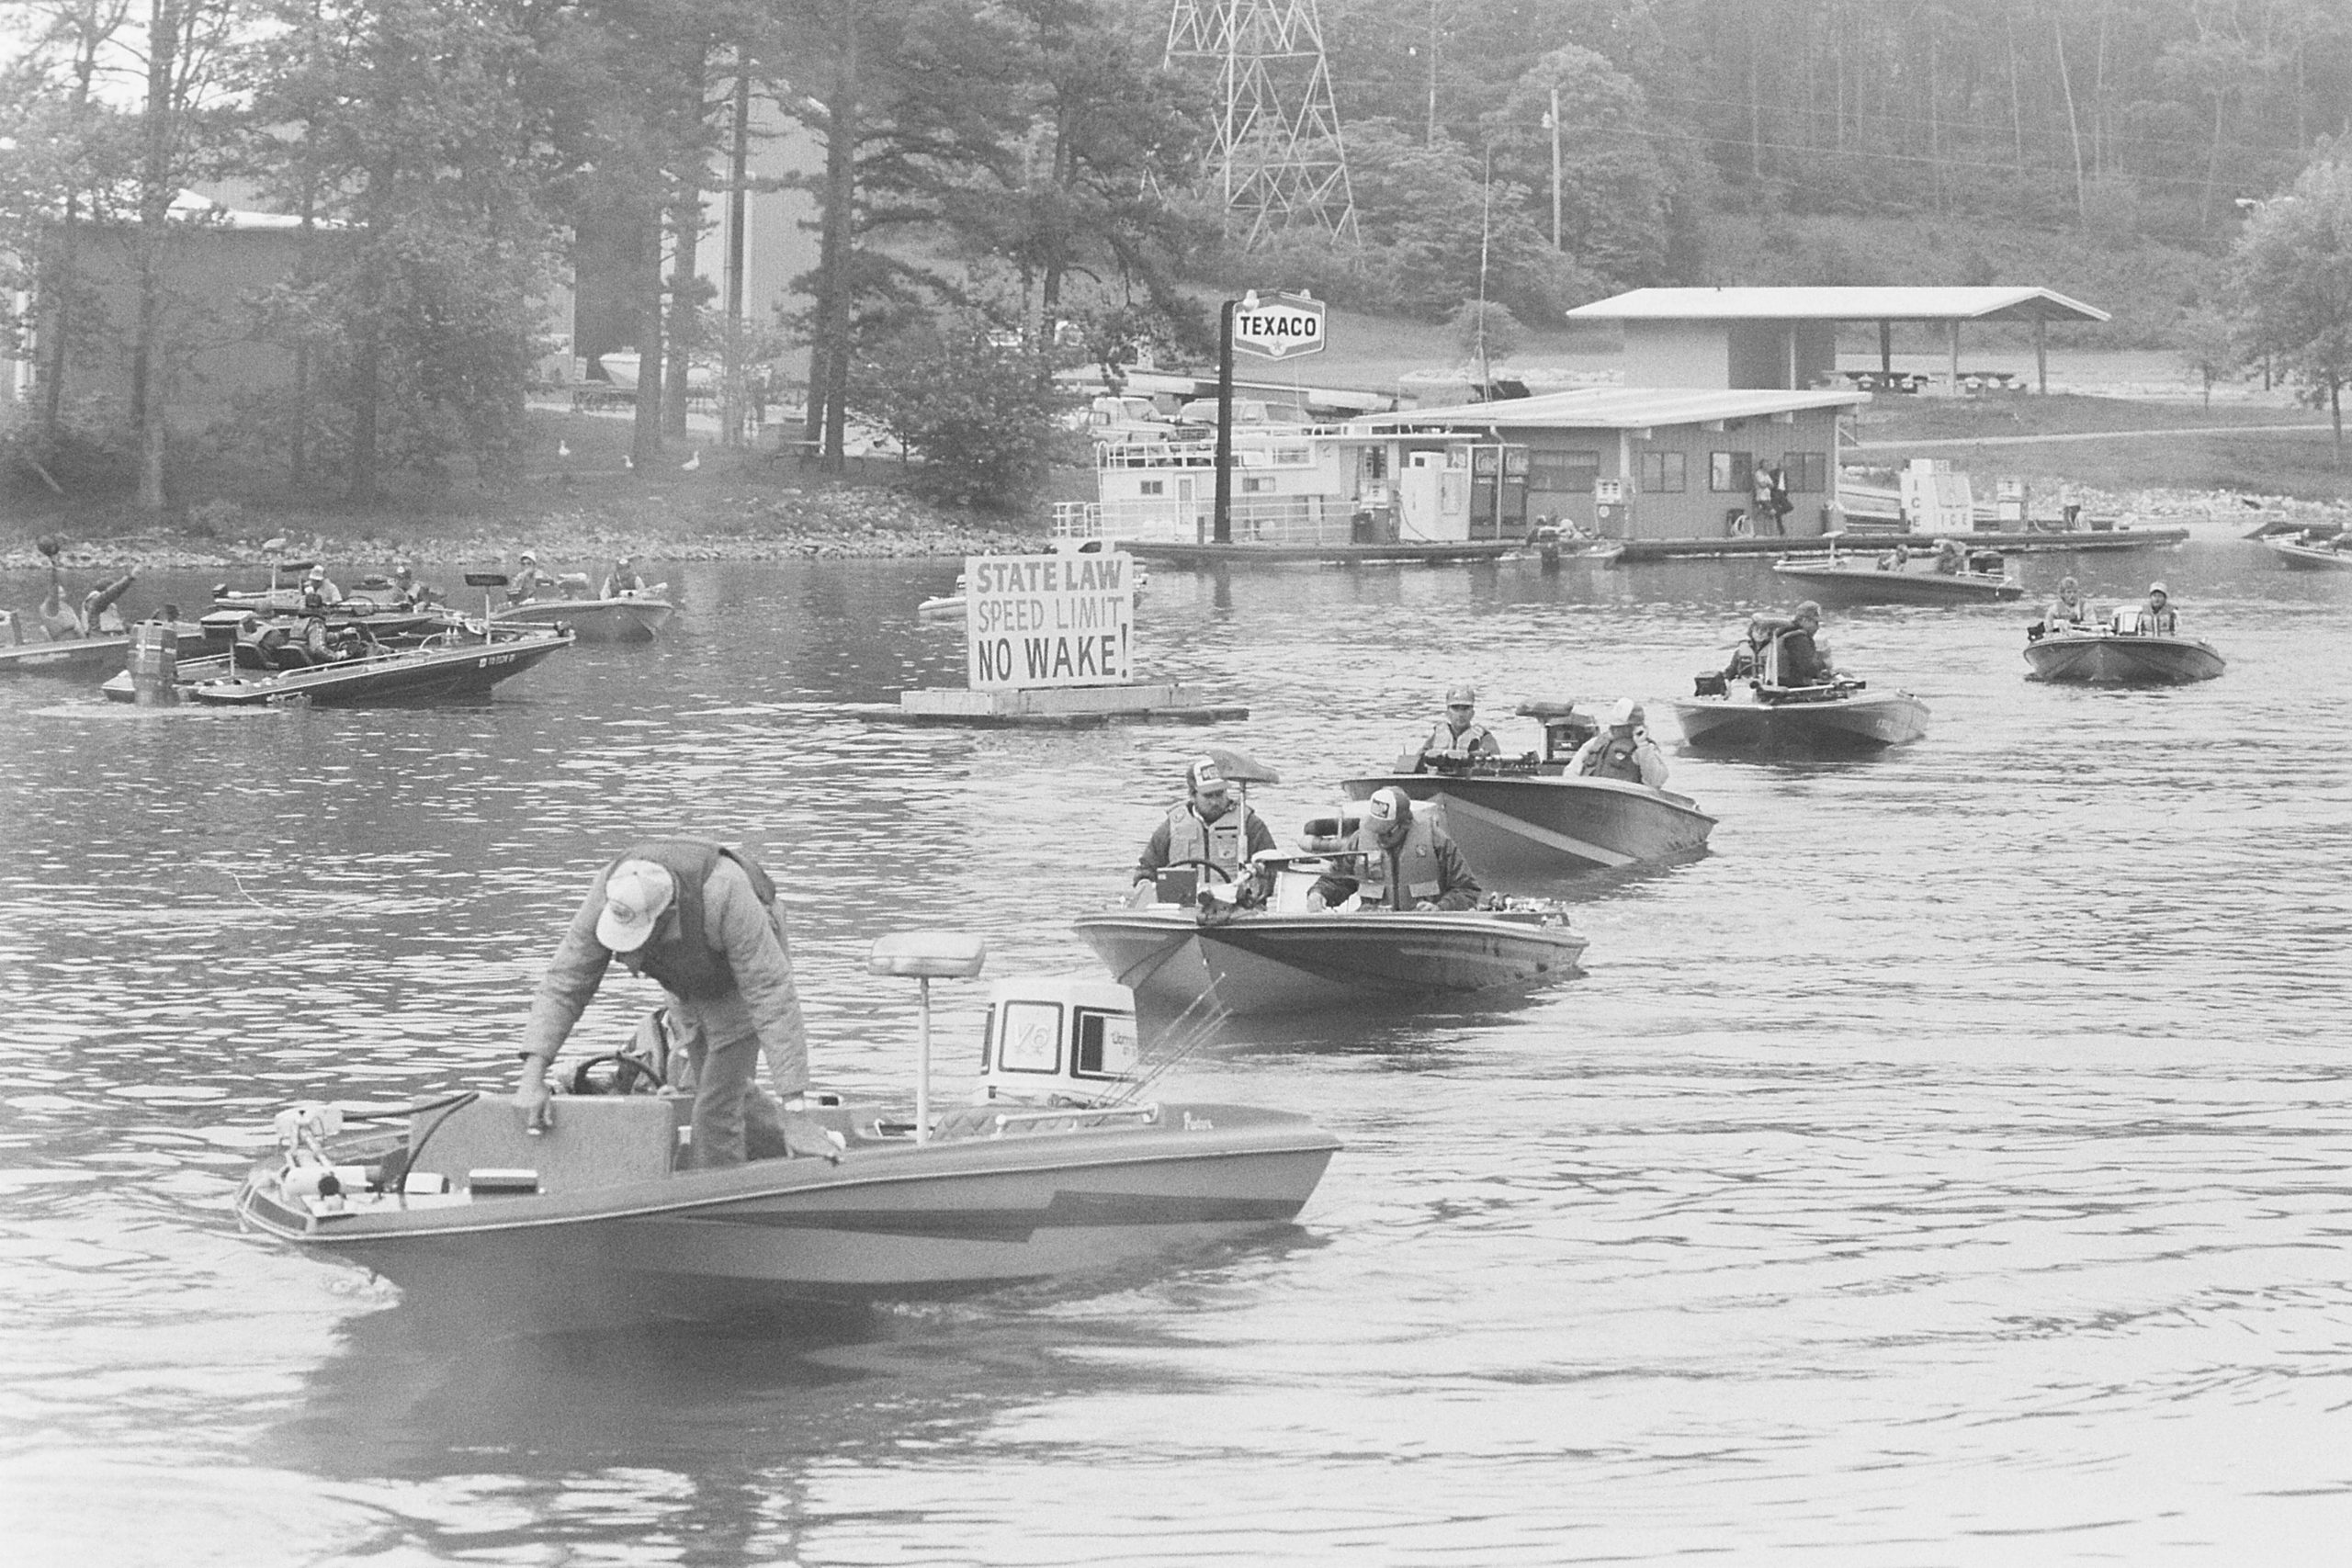 BASSfest begins on Chickamauga Lake in a few days, and itâs been many years since B.A.S.S. has visited the fishery. But between 1985 and 1991, we hosted five tournaments there, including the 1986 Bassmaster Classic. Some of the biggest veterans of the sport won these events; hereâs how they did it.